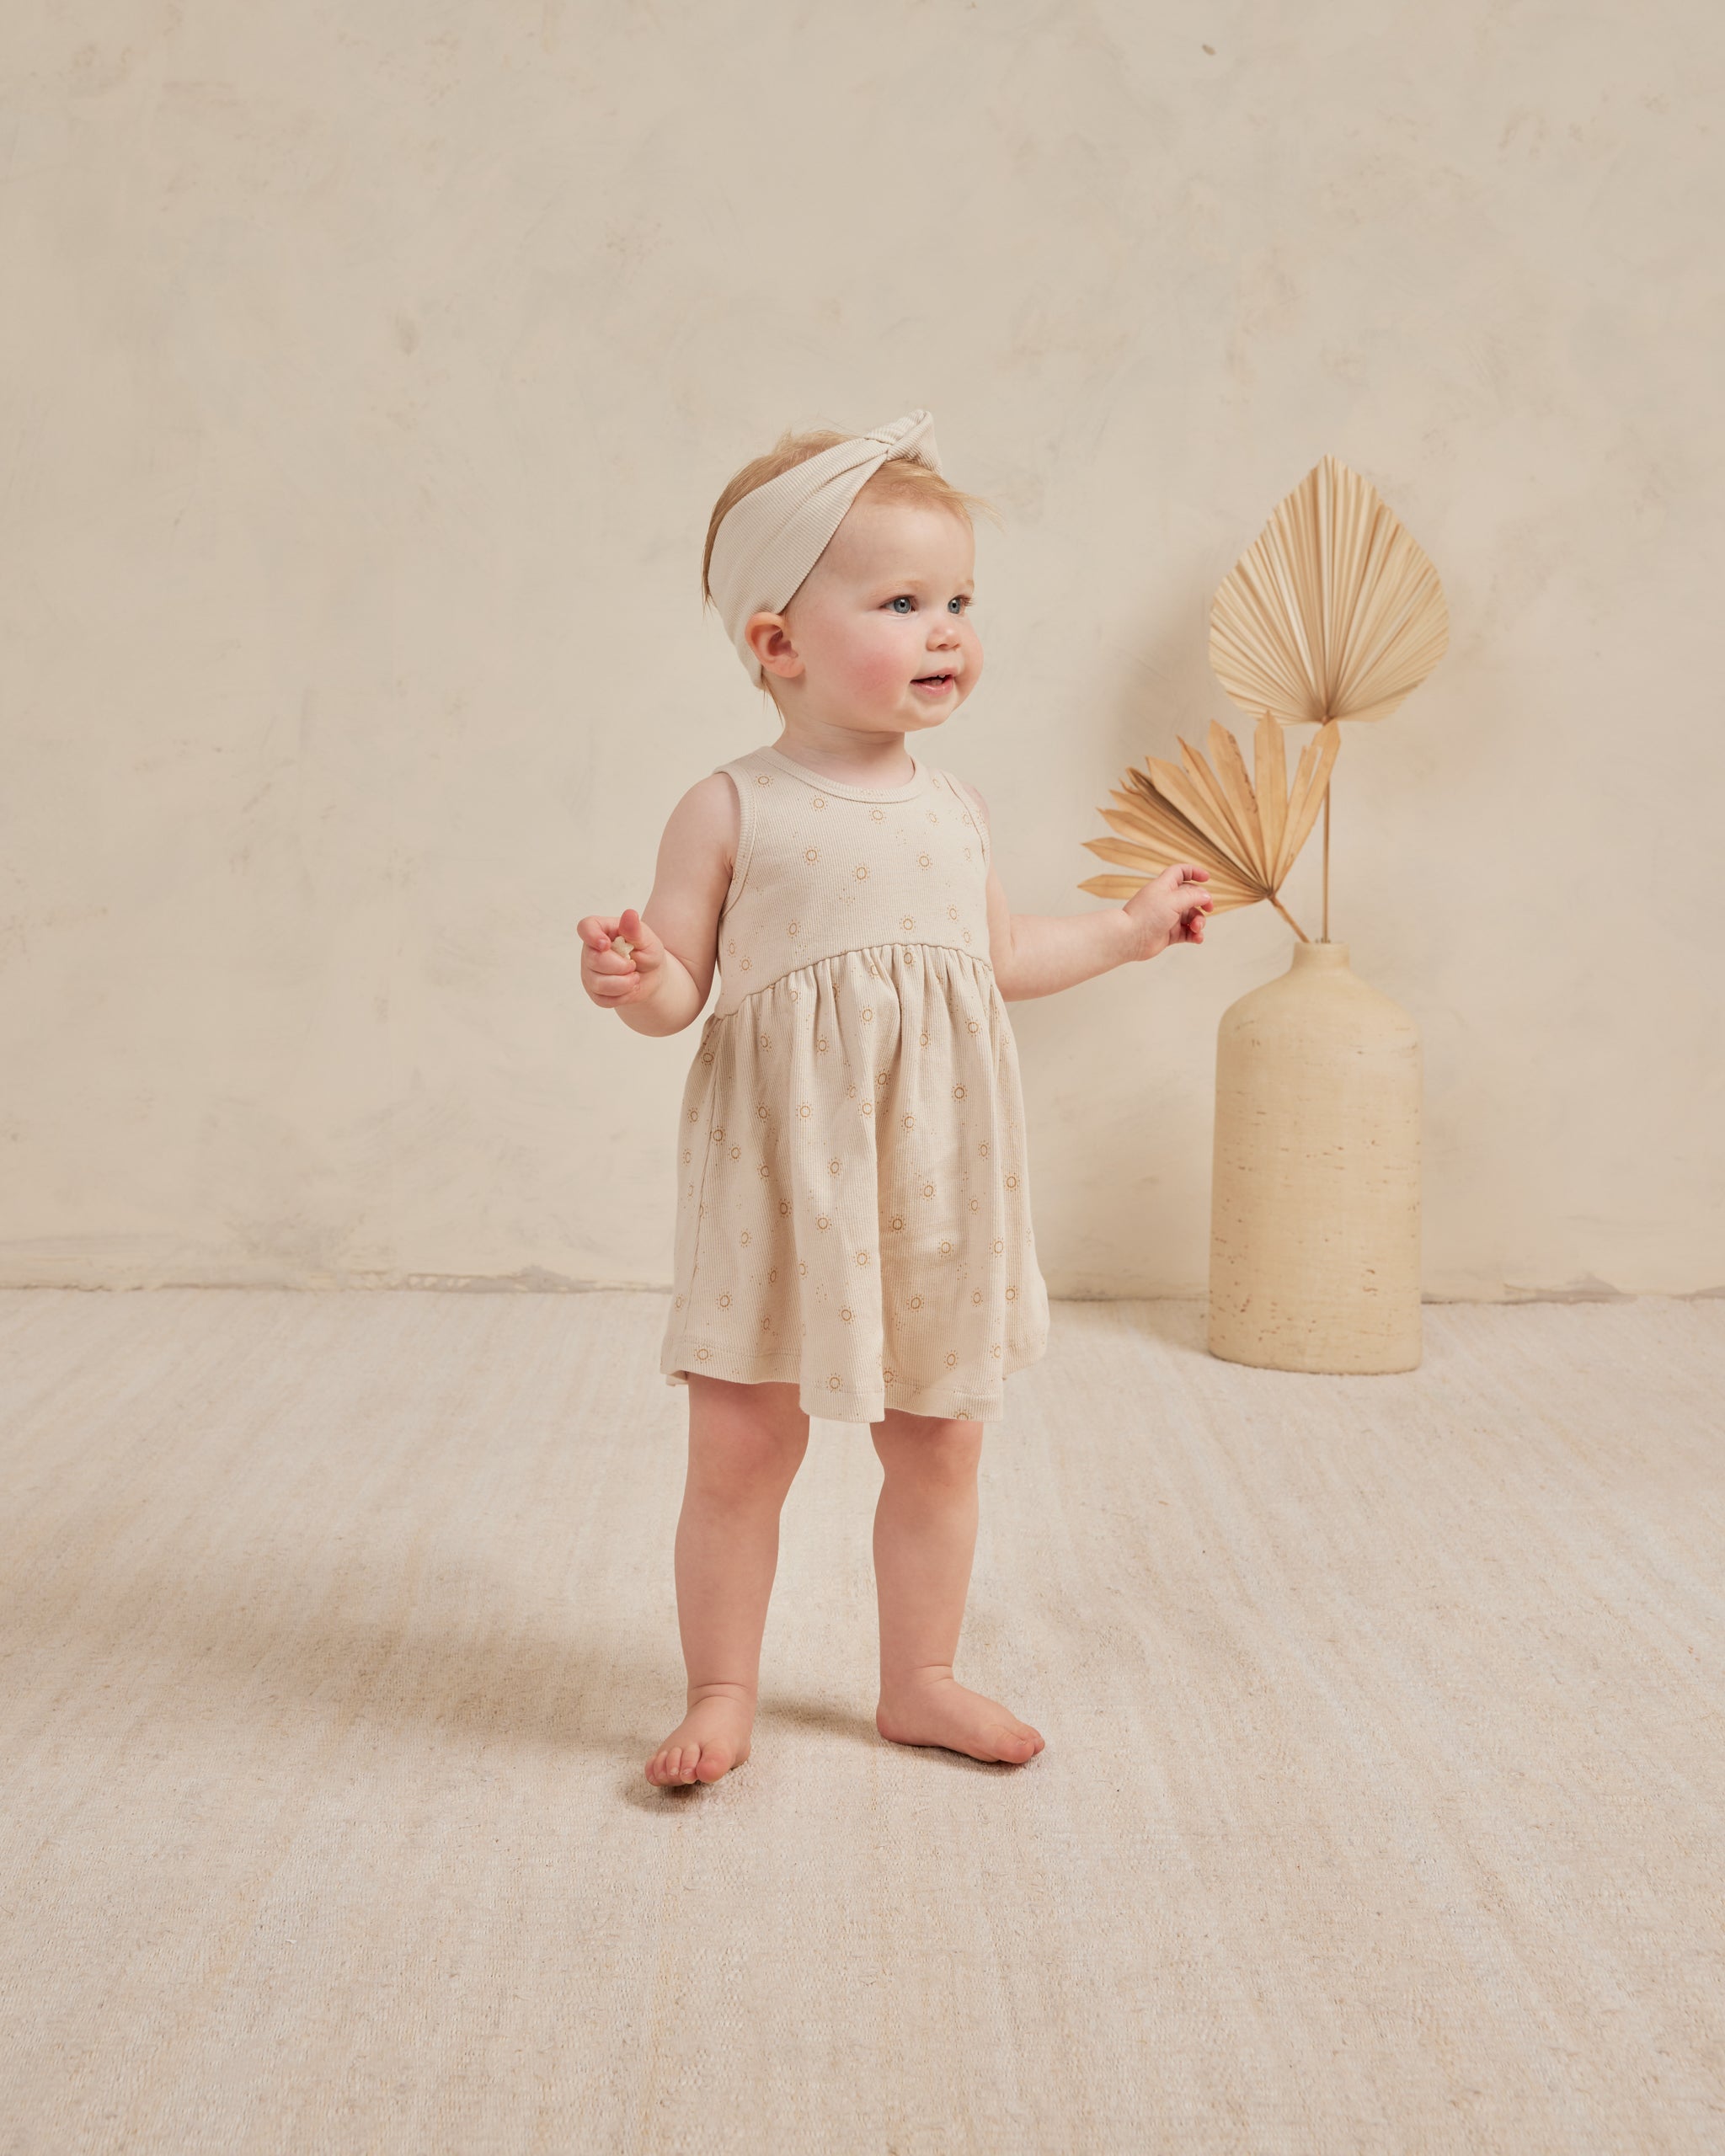 Ribbed Tank Dress || Suns - Rylee + Cru | Kids Clothes | Trendy Baby Clothes | Modern Infant Outfits |